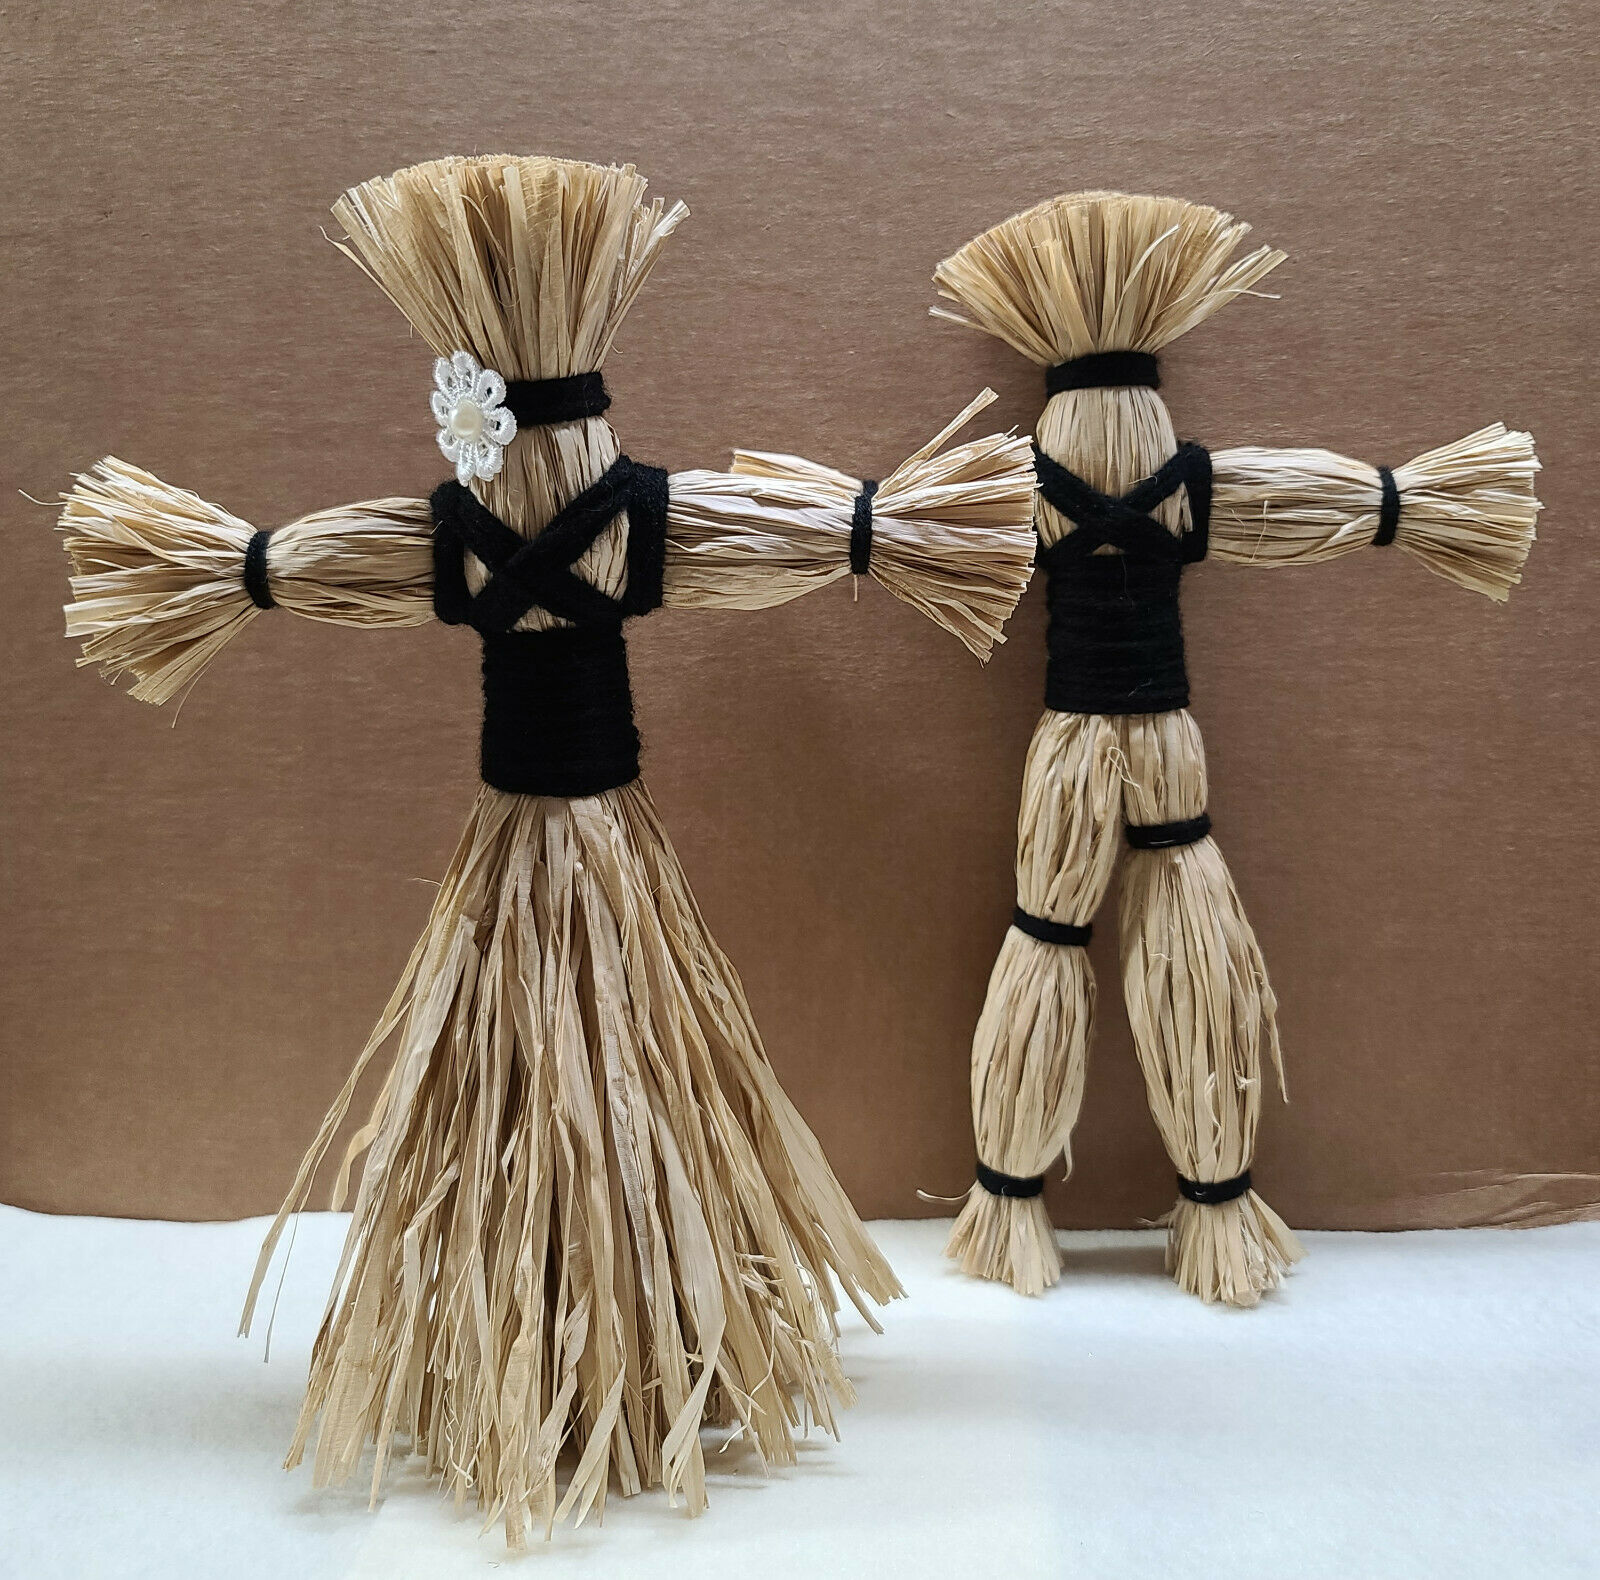 He & She Handmade Straw Voodoo Doll With Pins 12 In Tall